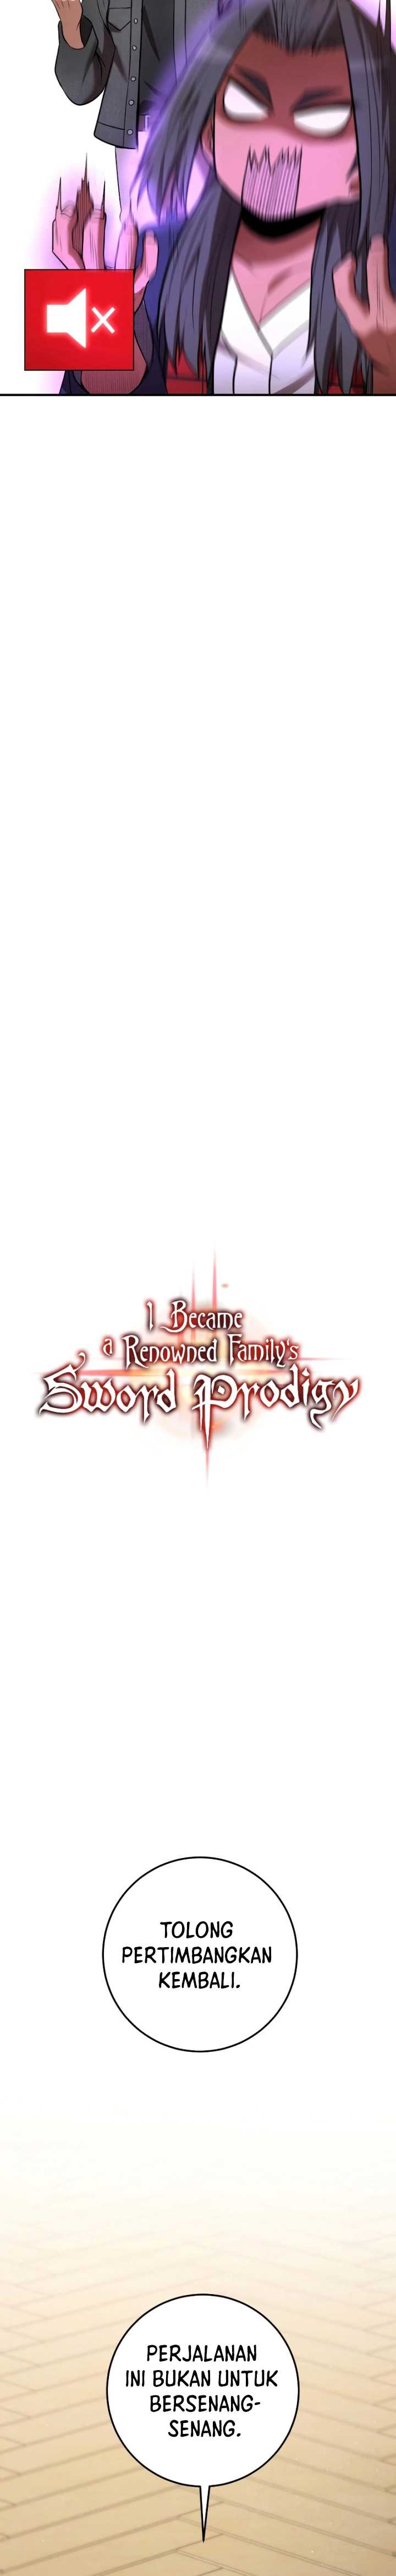 I Became a Renowned Family’s Sword Prodigy Chapter 62